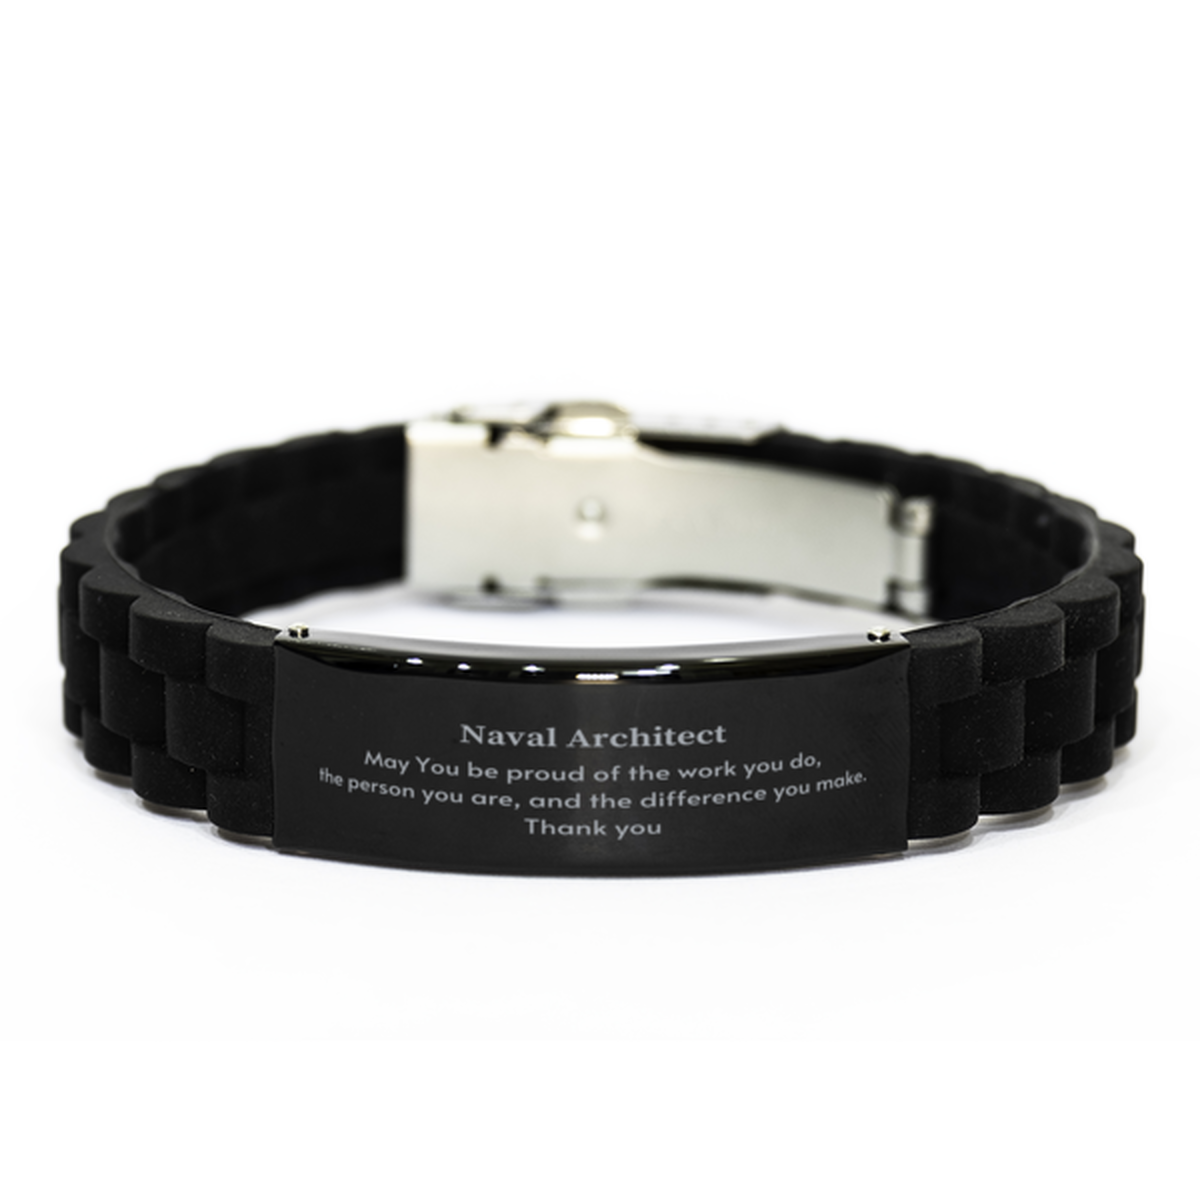 Heartwarming Black Glidelock Clasp Bracelet Retirement Coworkers Gifts for Naval Architect, Naval Architect May You be proud of the work you do, the person you are Gifts for Boss Men Women Friends